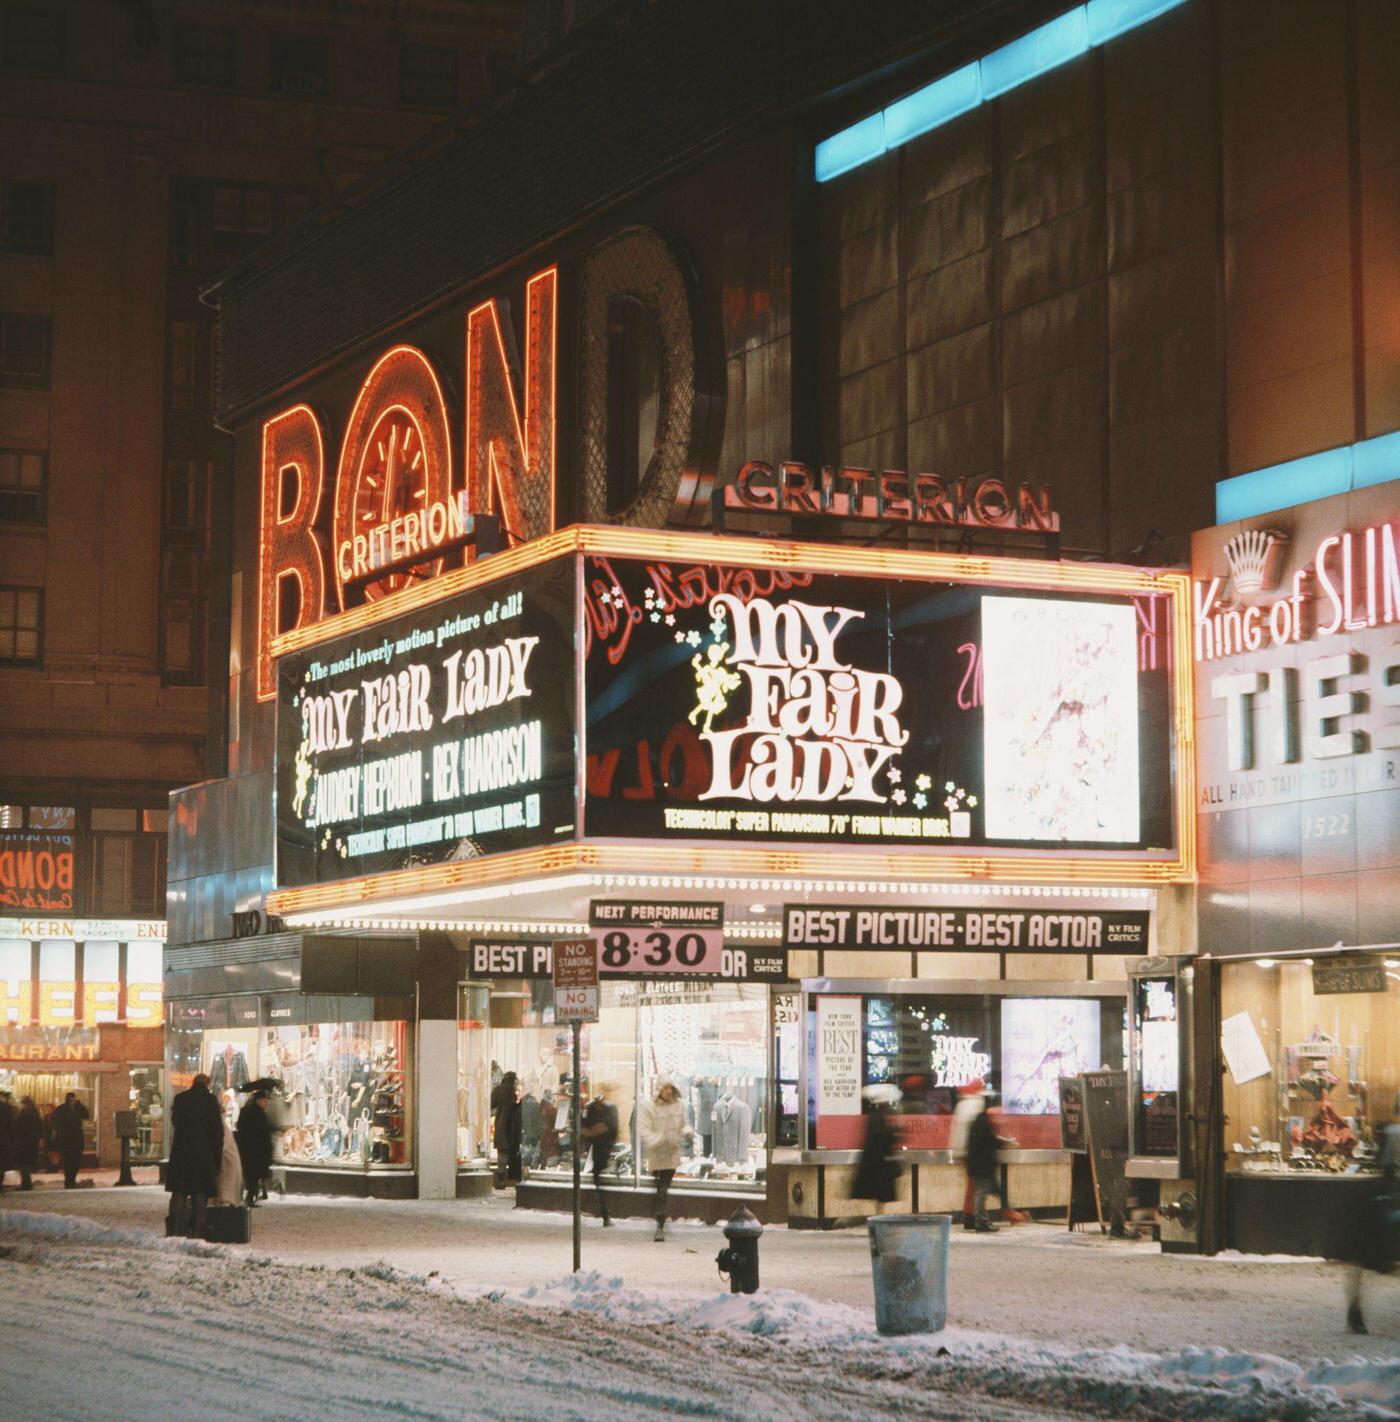 The Criterion Theater On Times Square With Bond Clothes Behind, Manhattan, 1965